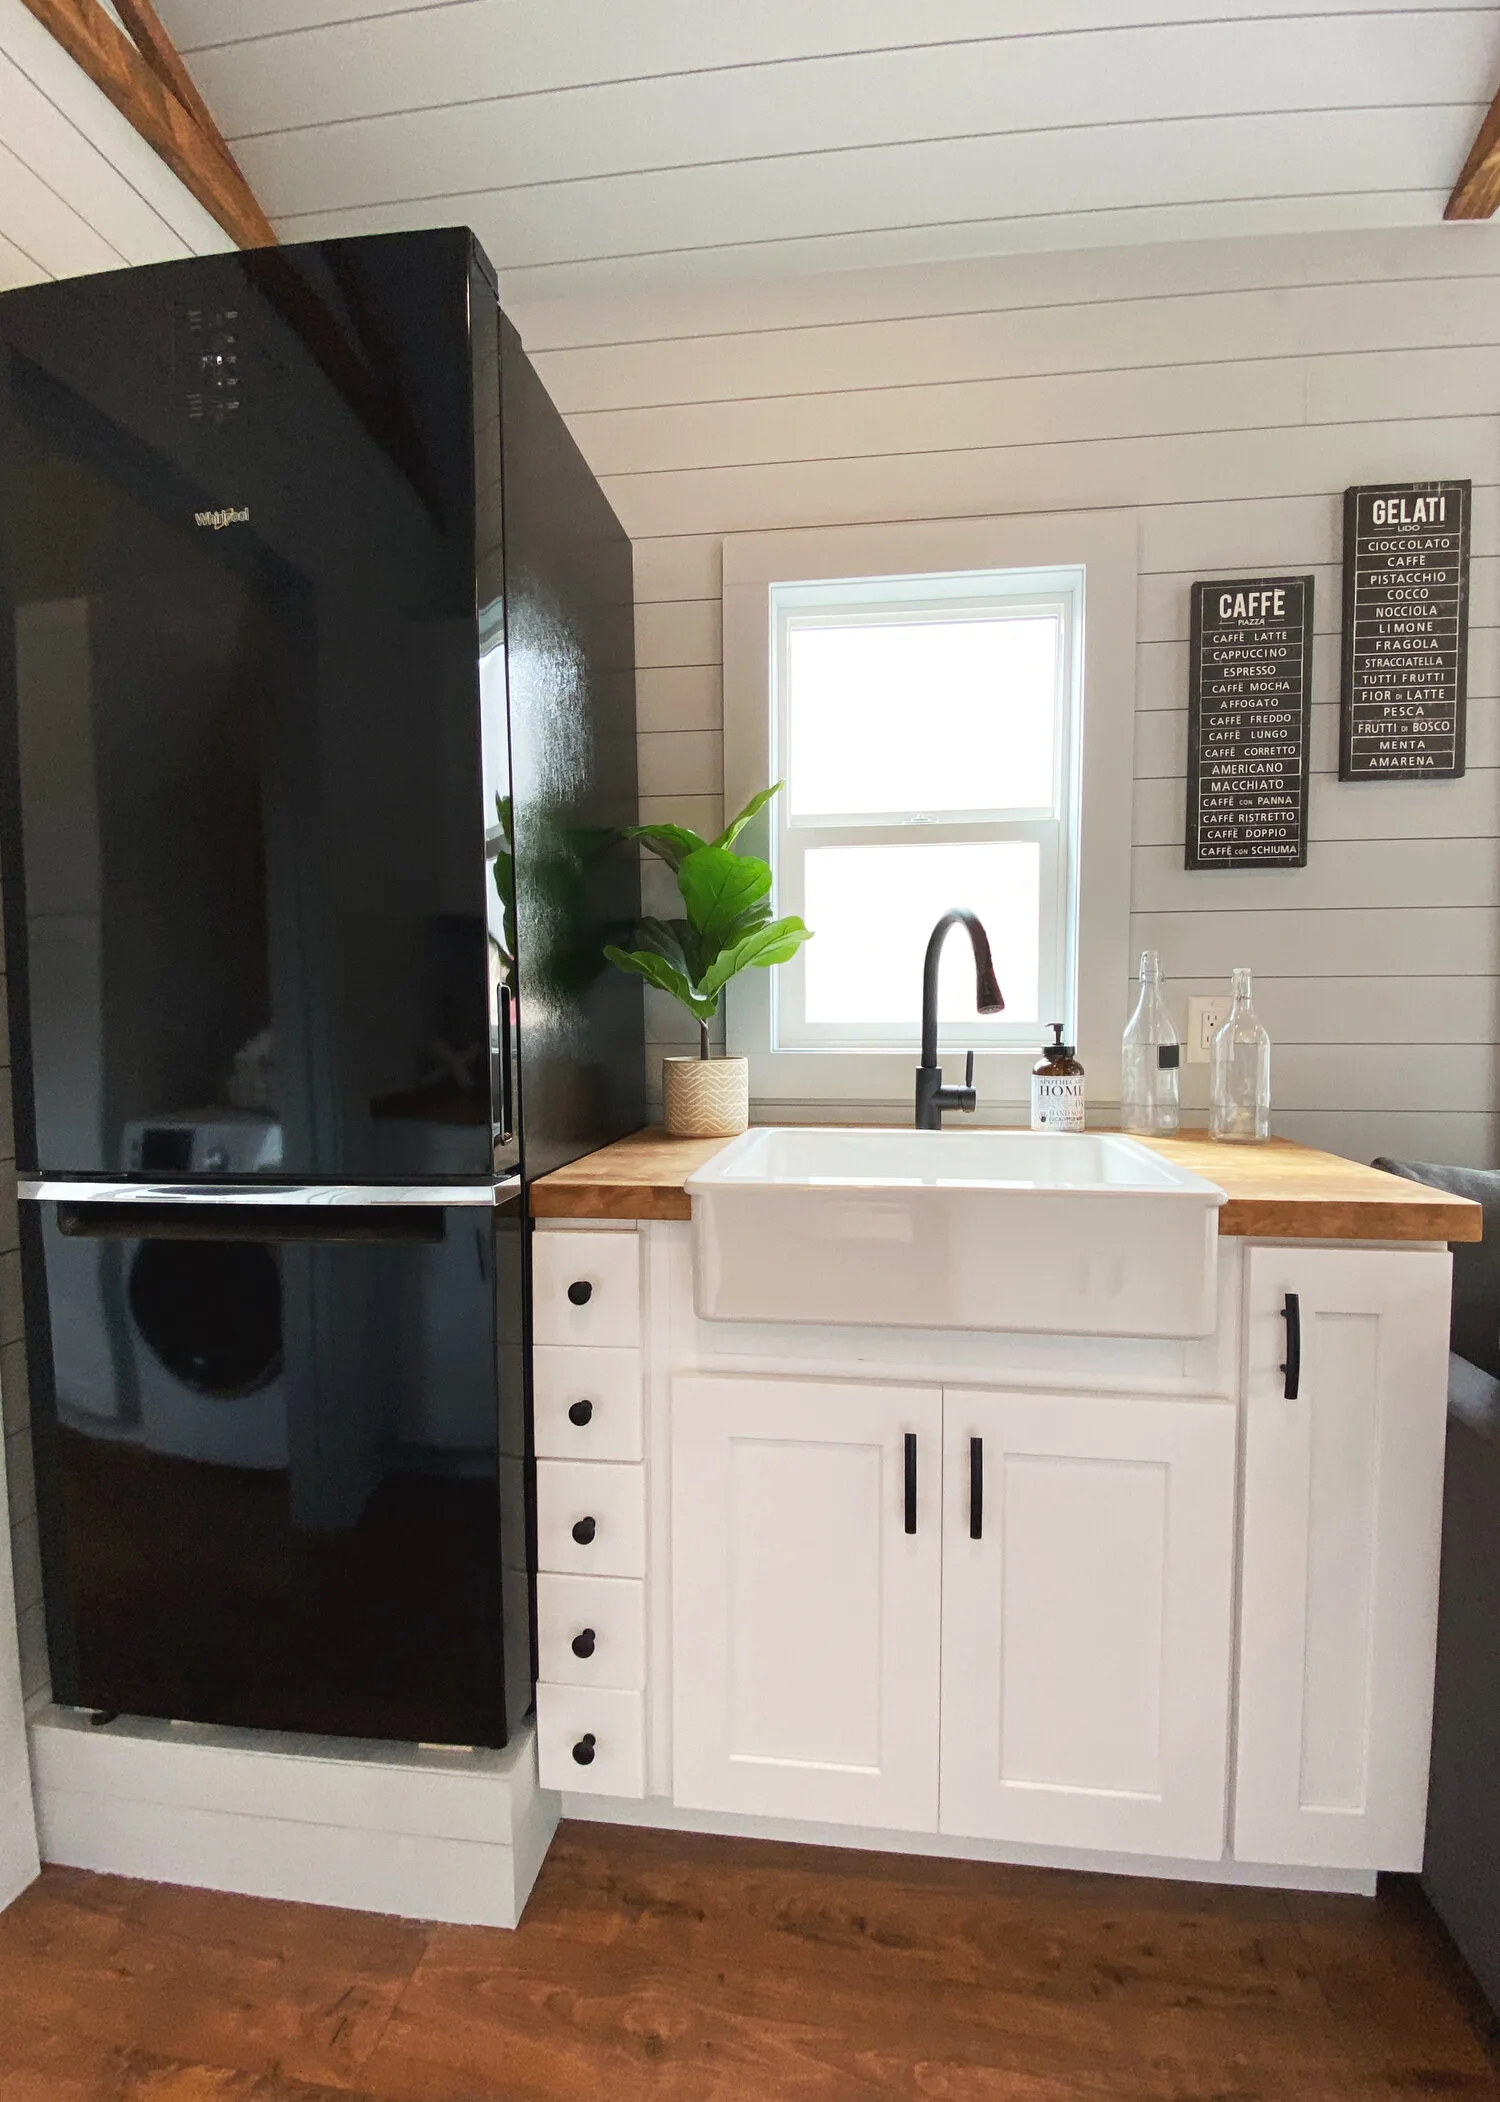 Full Size Refrigerator - Lauren's Flat by Uncharted Tiny Homes